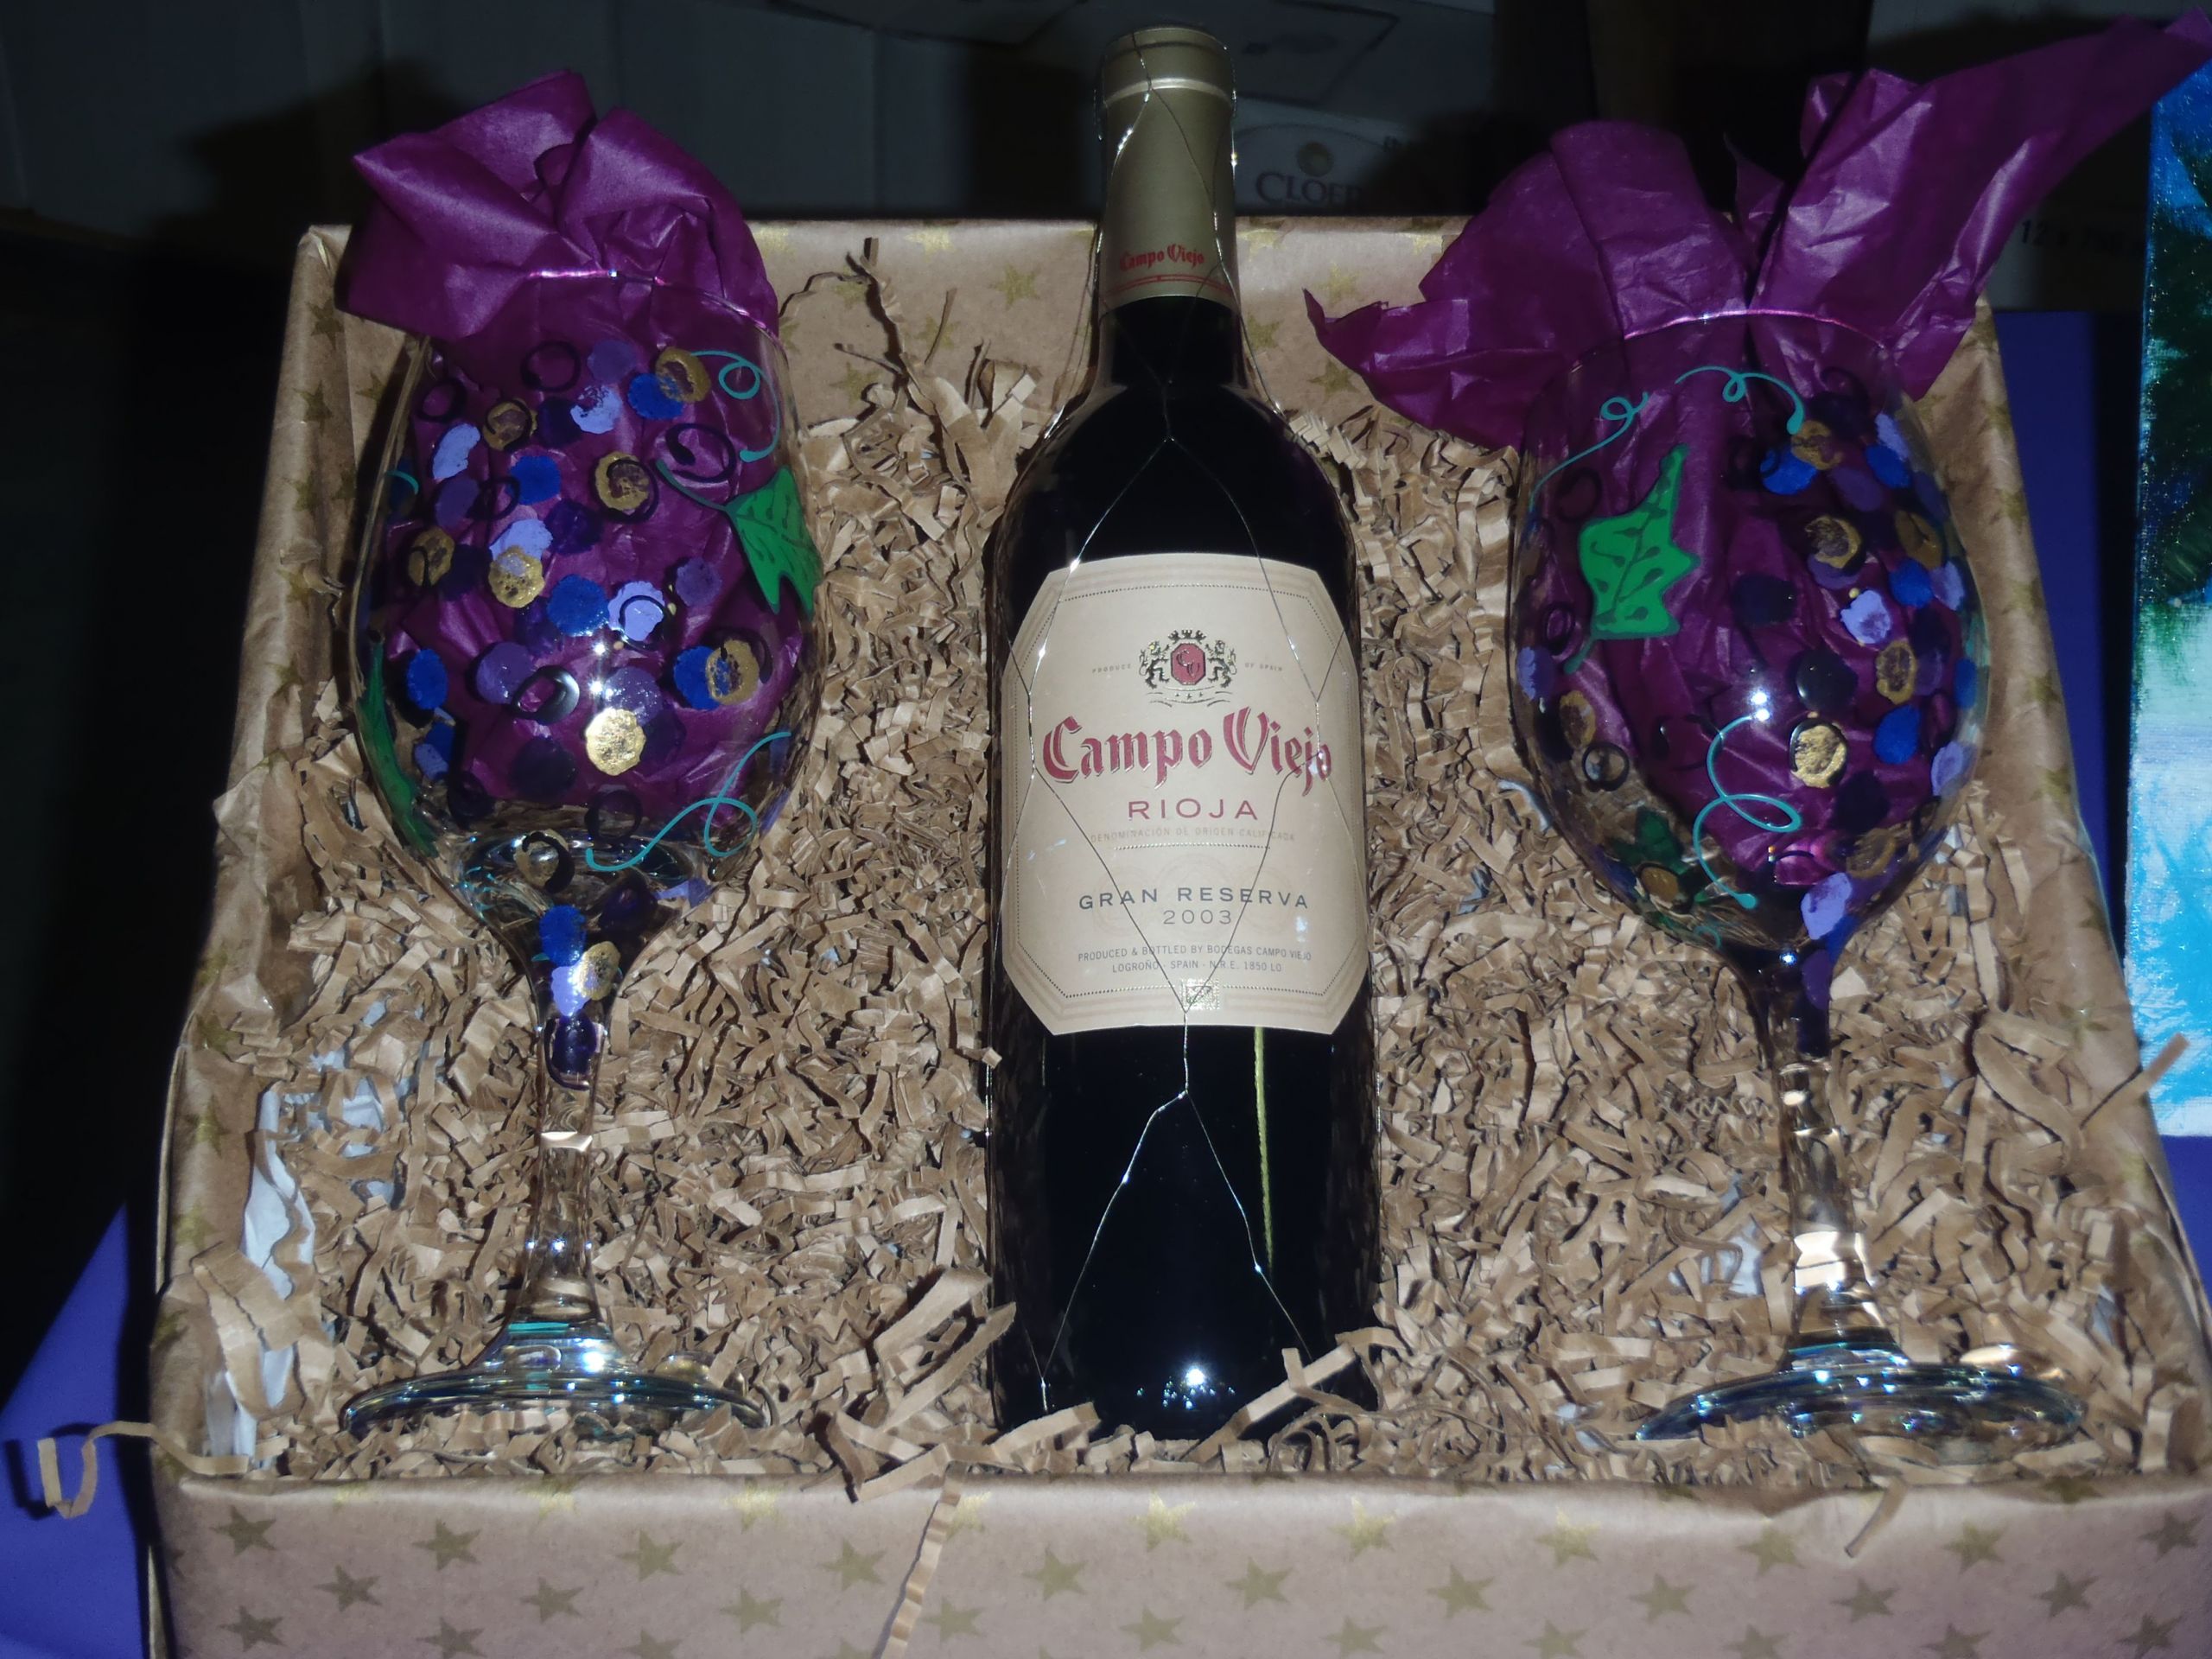 Wine Glass Gift Basket Ideas
 Pin by Ashley McInnis on Gifts